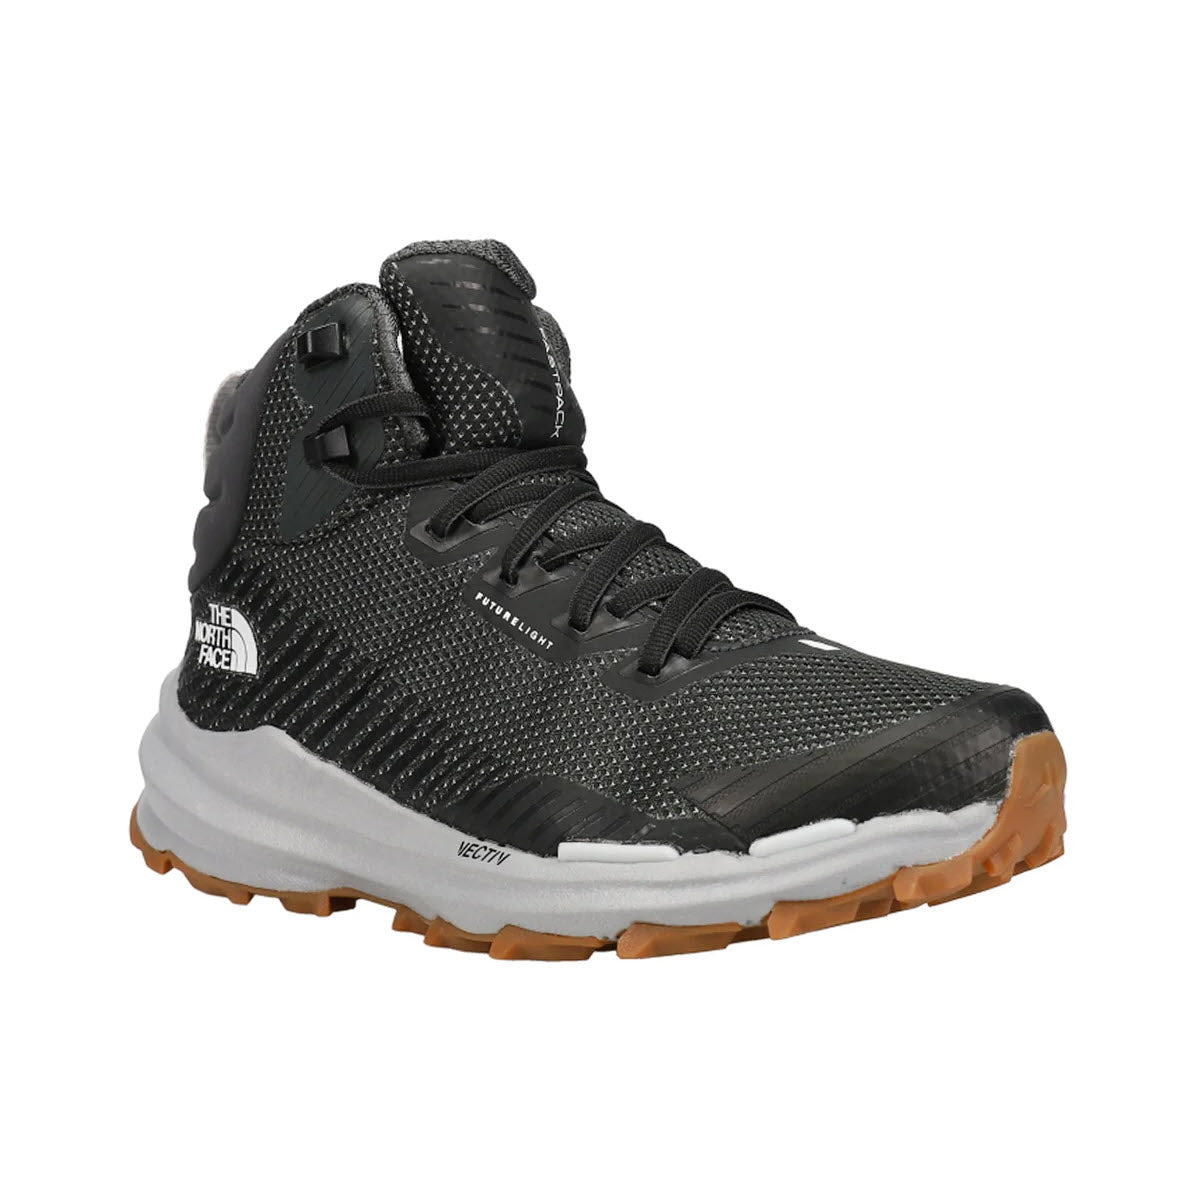 A black and gray North Face VECTIV FASTPACK MID FUTURELIGHT ASPHALT hiking boot with lace-up front and a rugged brown sole.